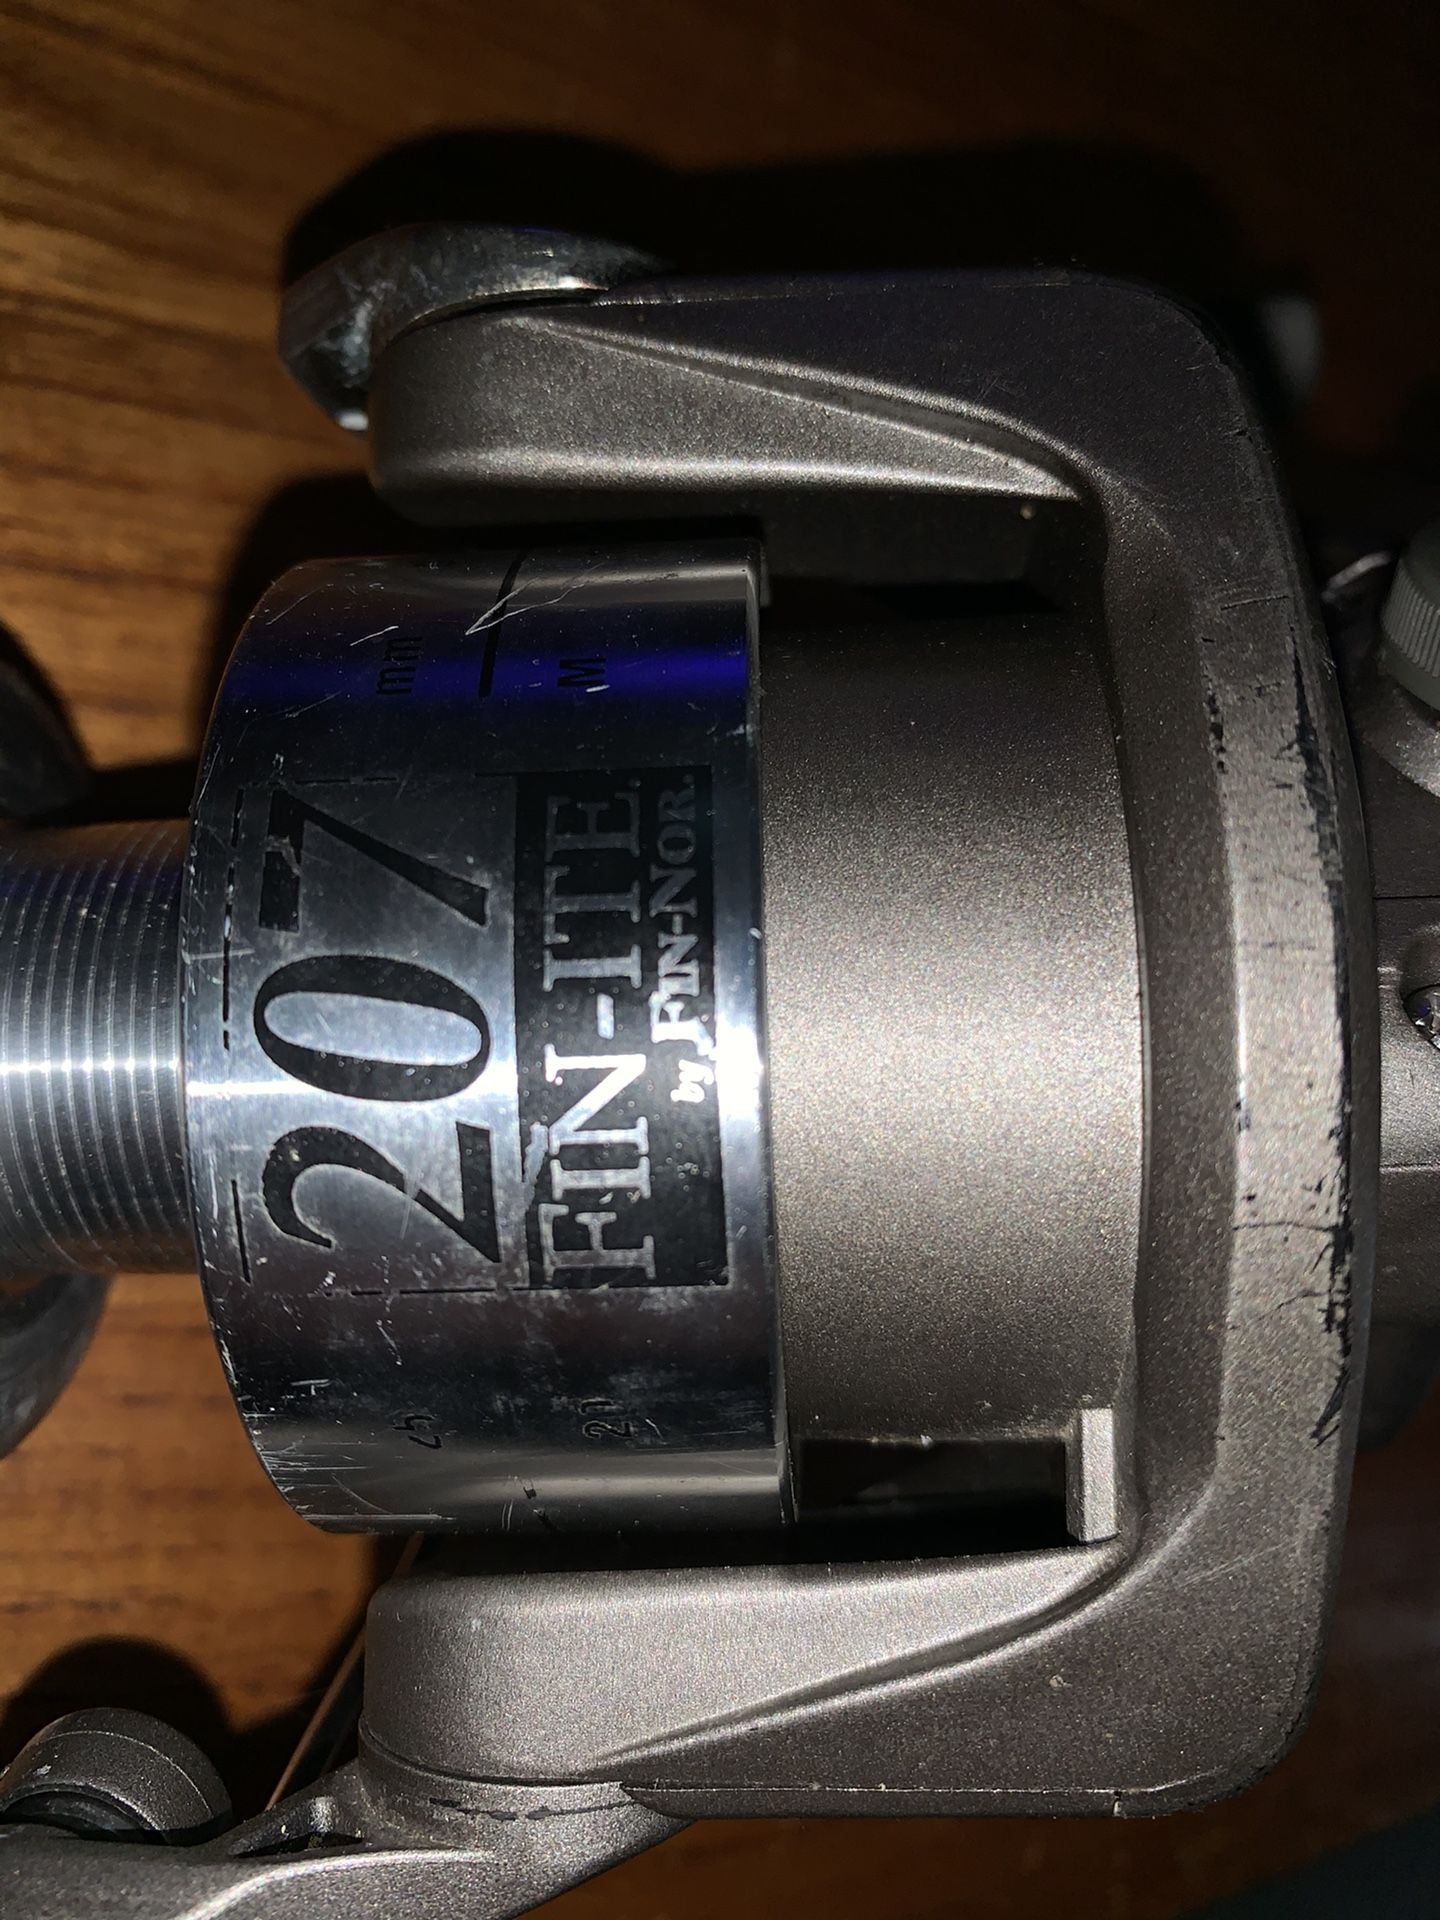 Fin-Nor Fin-Ite 207 surfing fishing reel